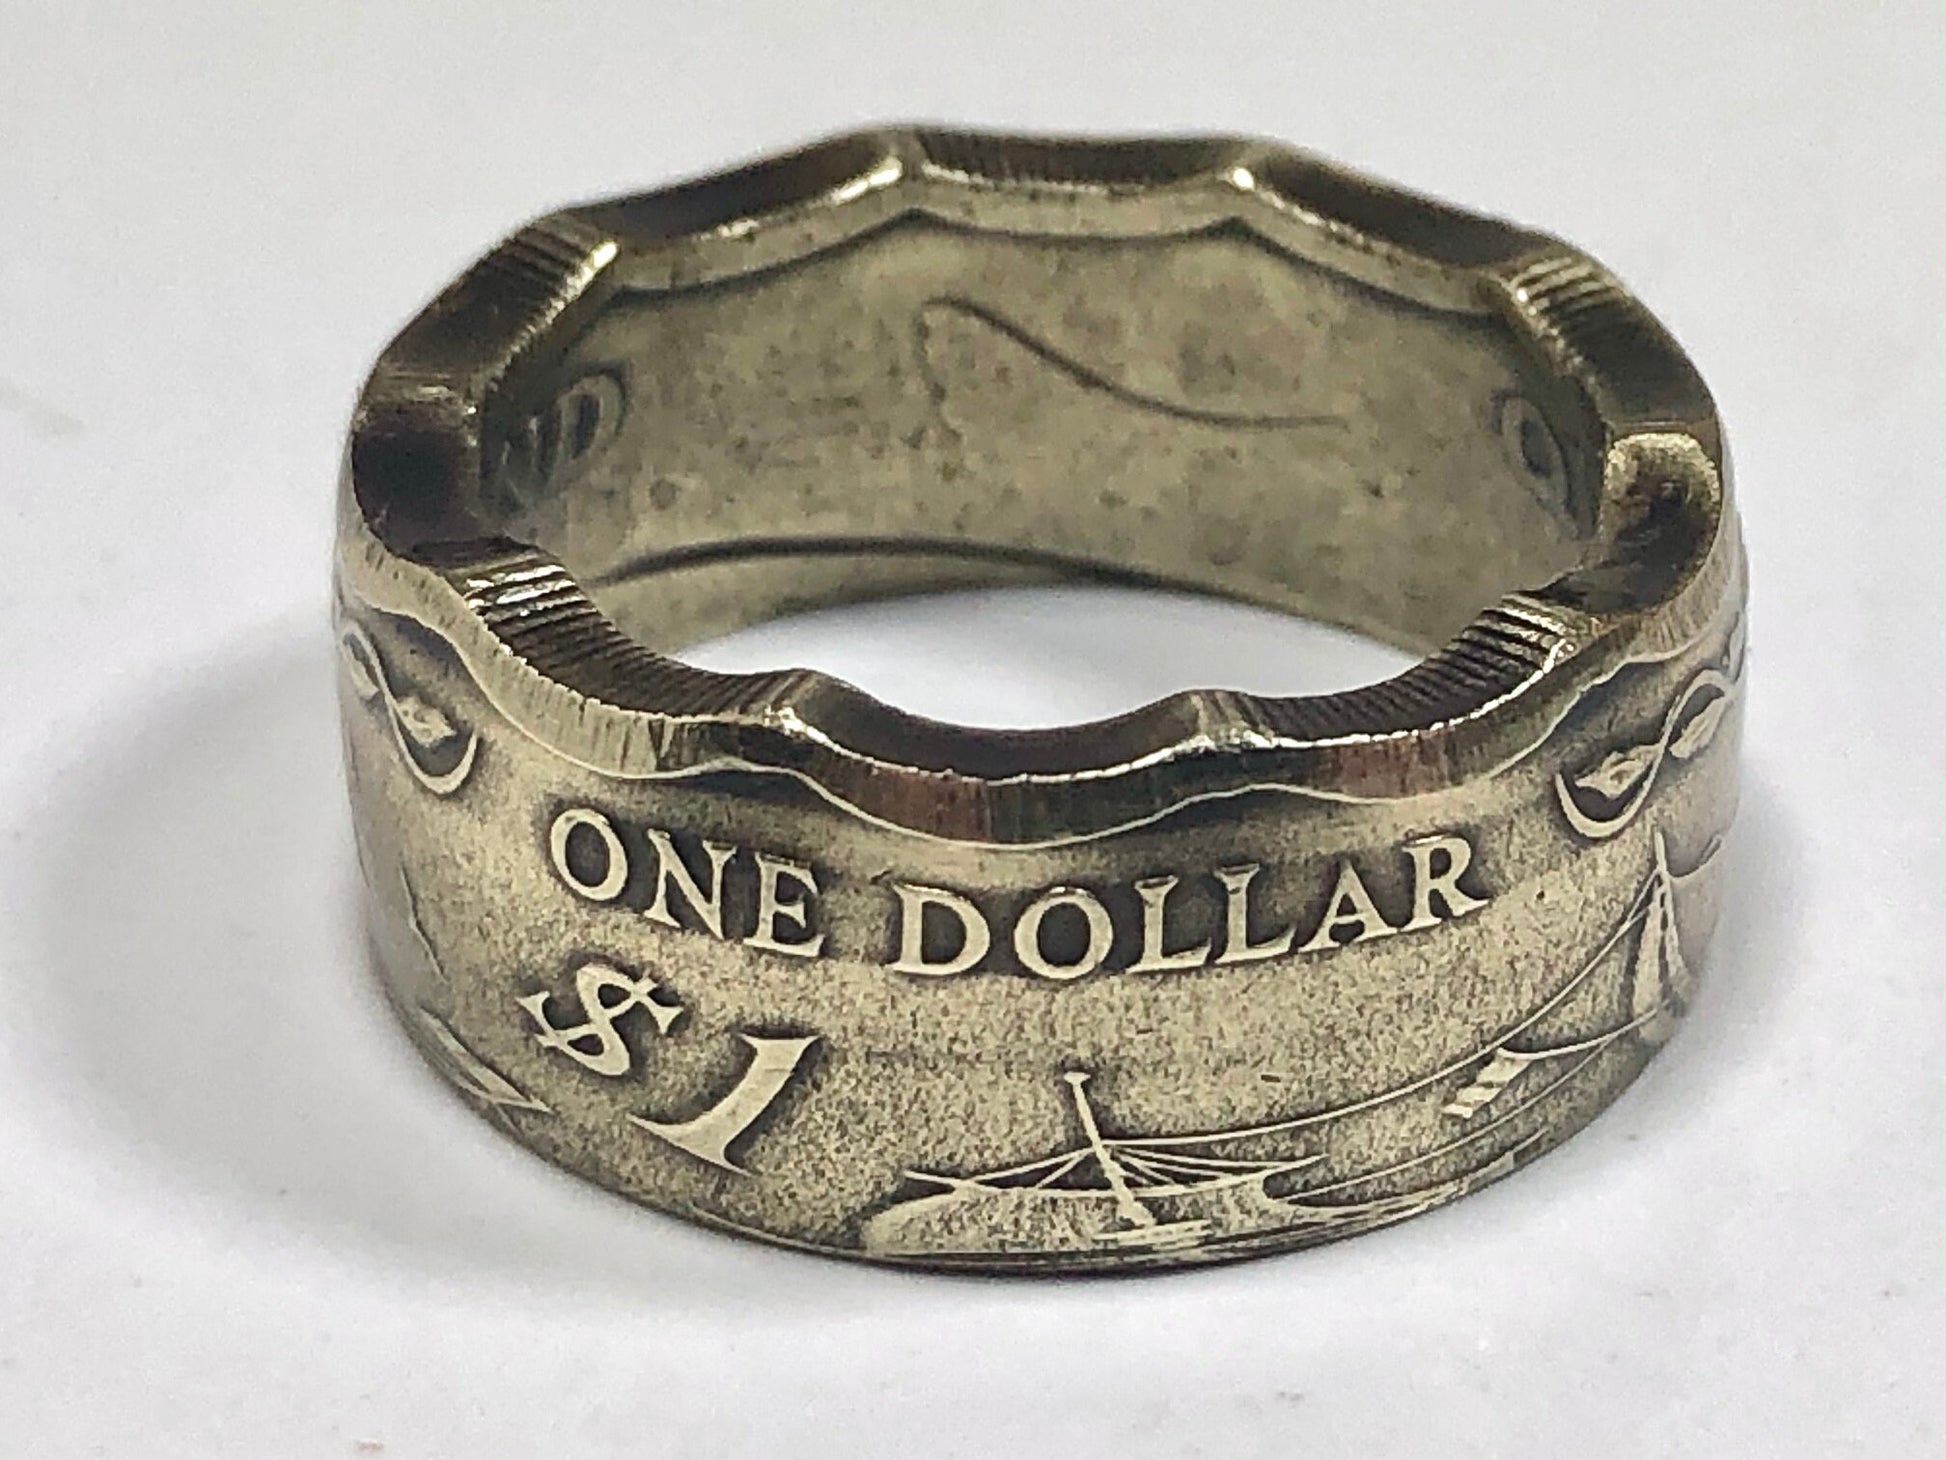 Belize Ring One Dollar Coin Ring Handmade Personal Jewelry Ring Gift For Friend Coin Ring Gift For Him Her World Coin Collector